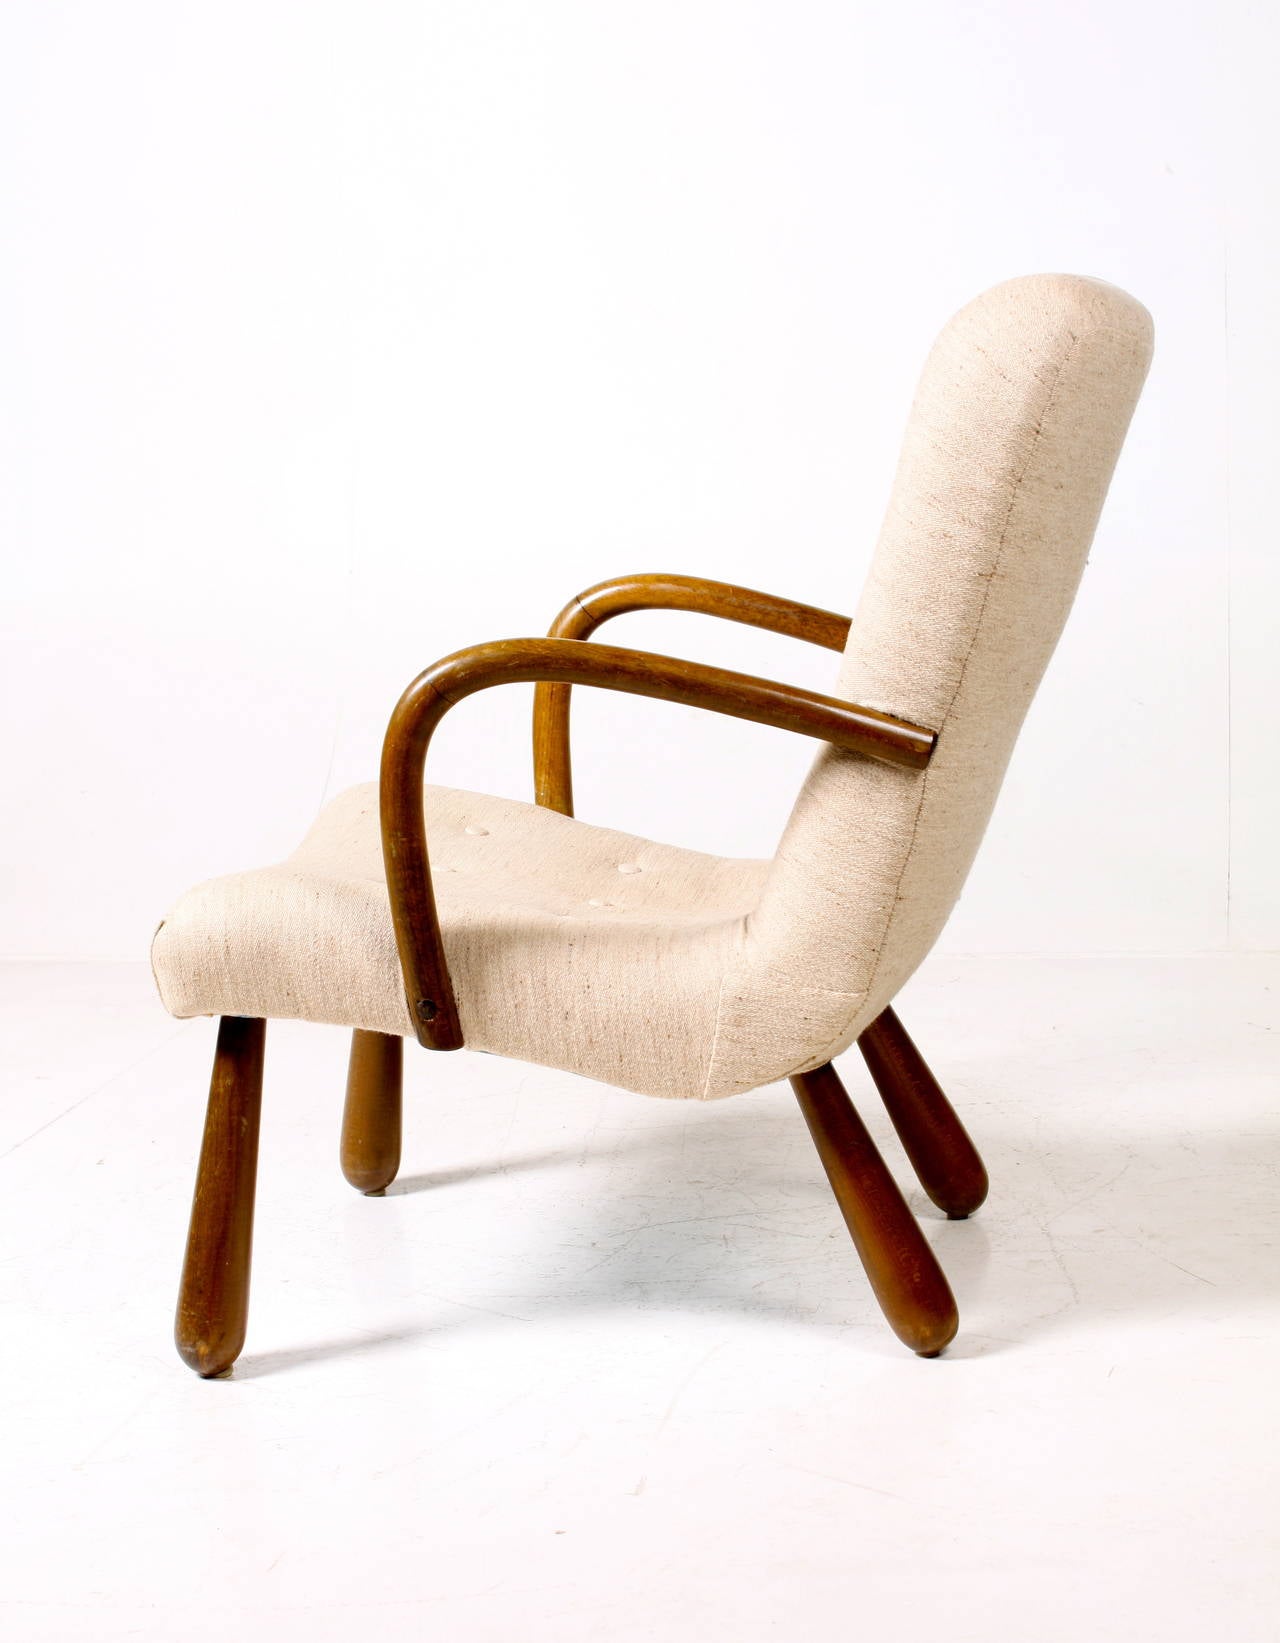 Great looking easy chair, made in Denmark in the 1940s, great original condition.